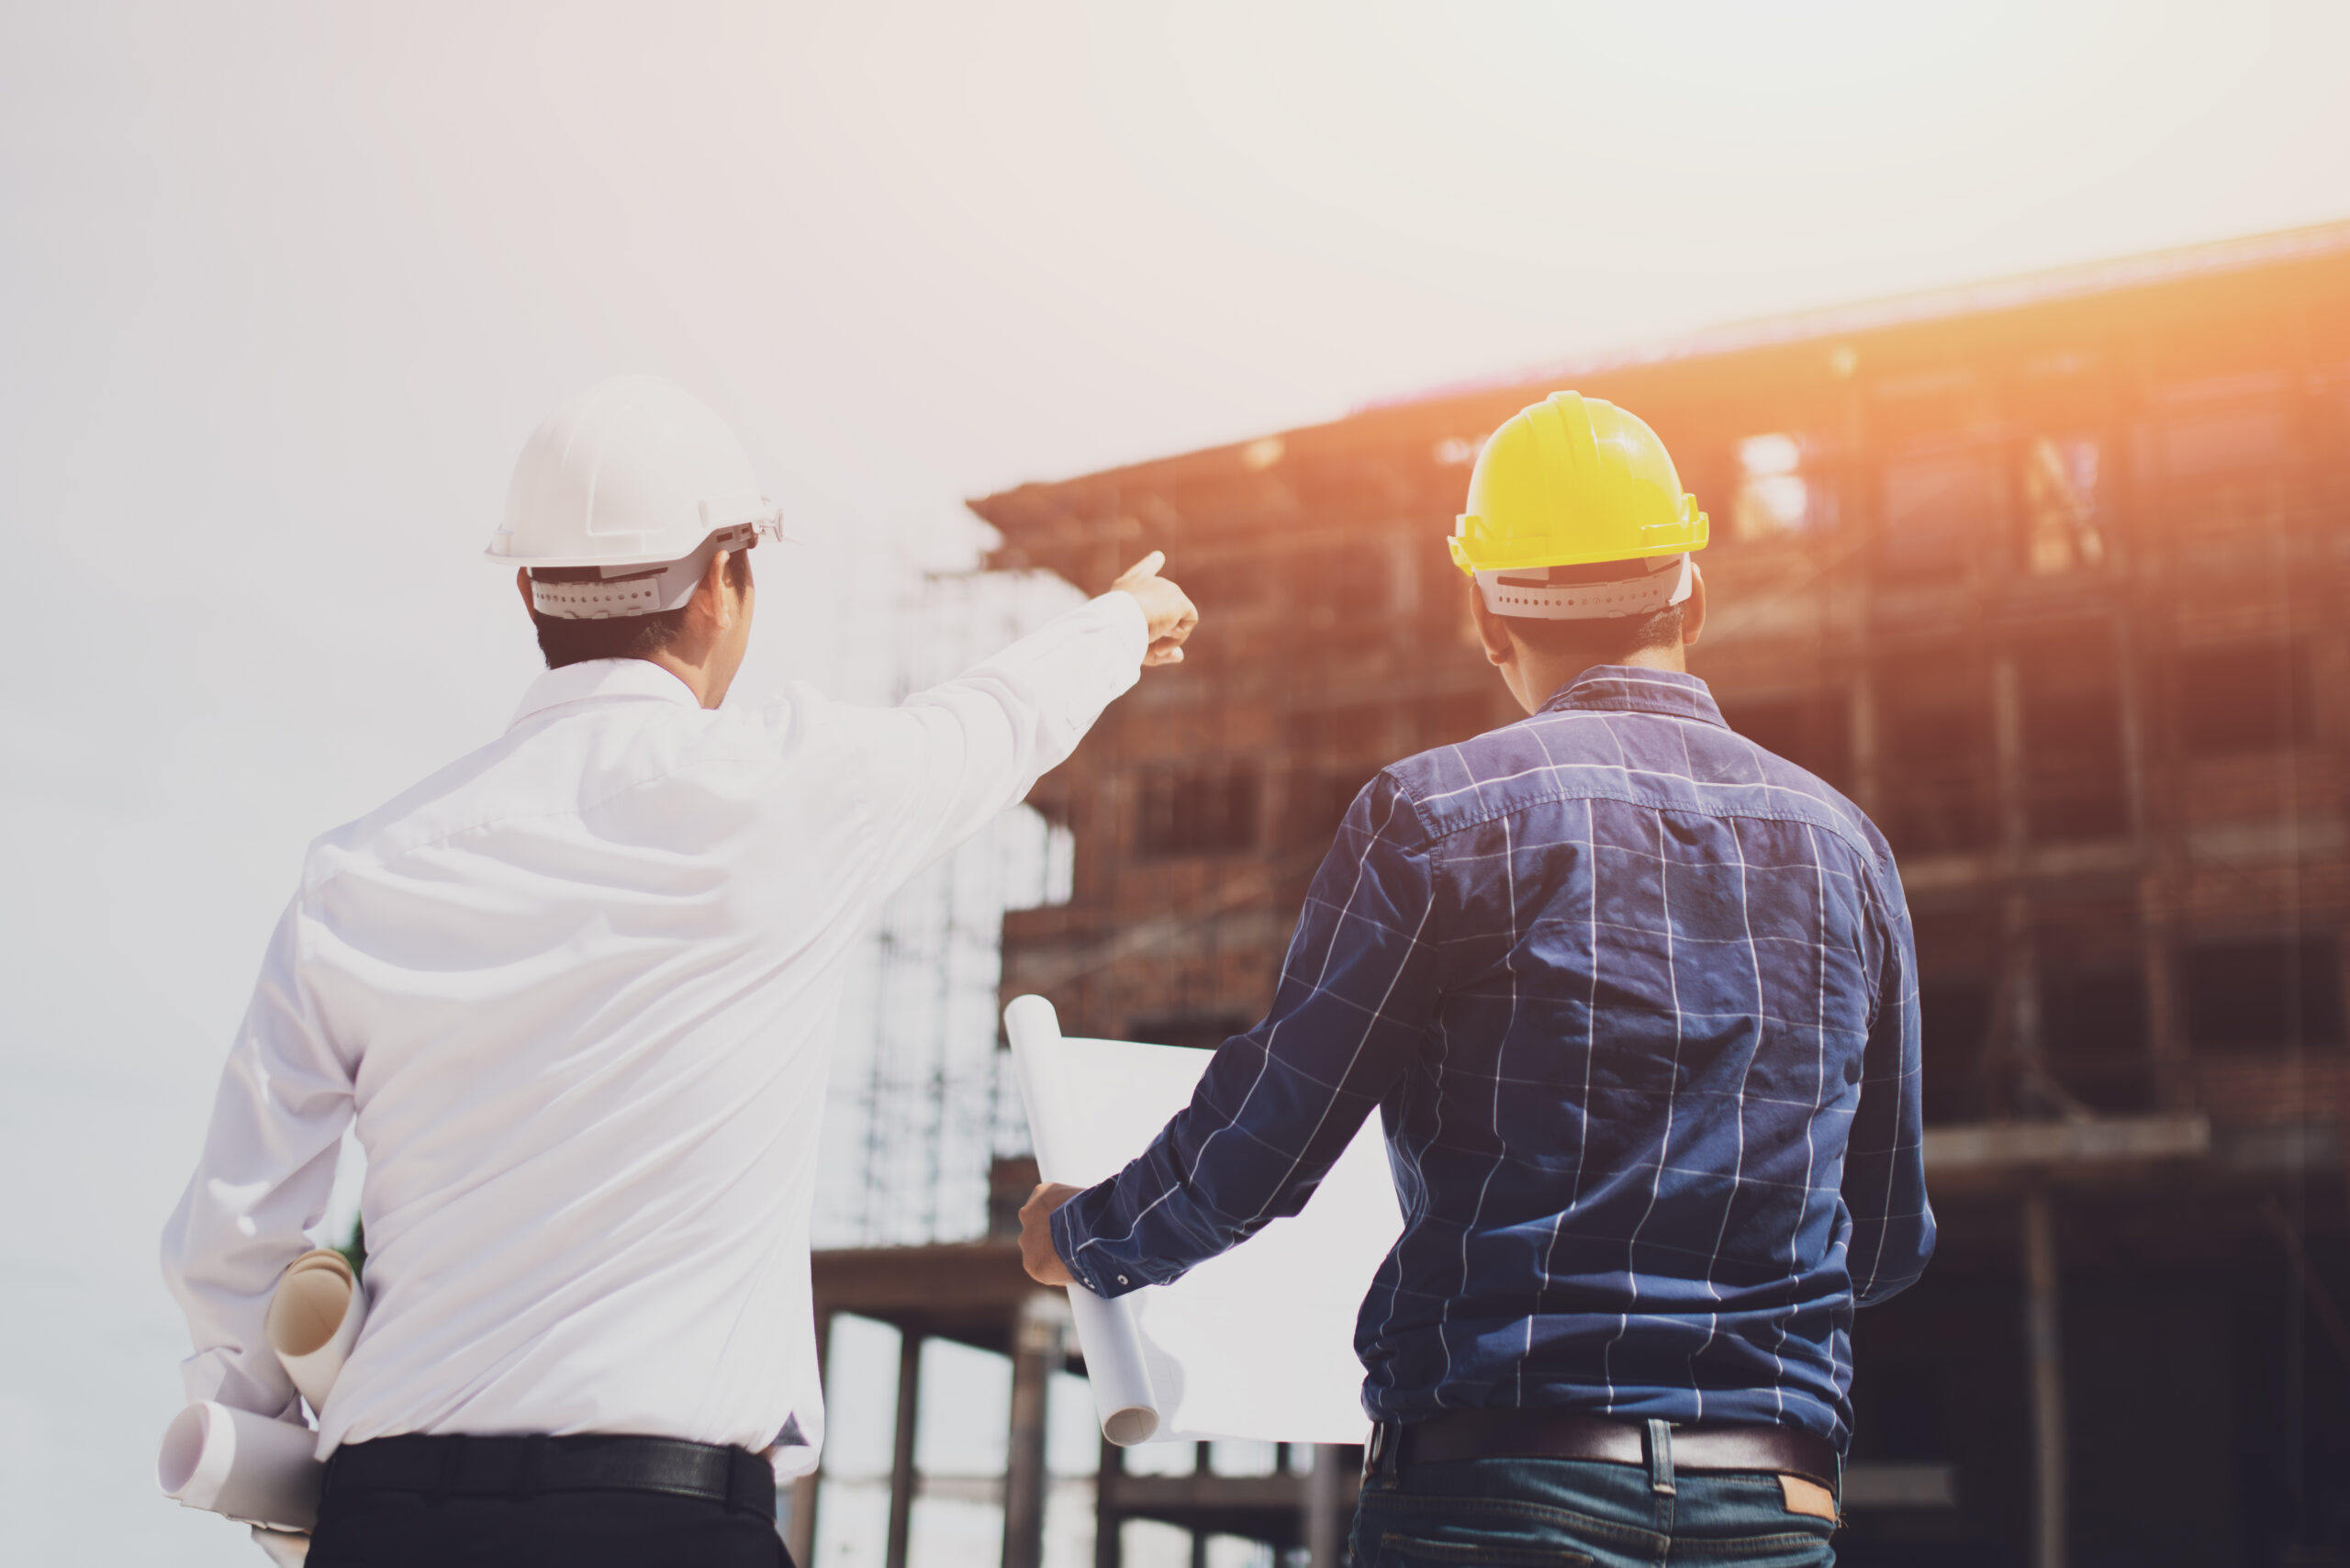 two men in hard hats pointing up at a building under construction looking holding plans and conversing